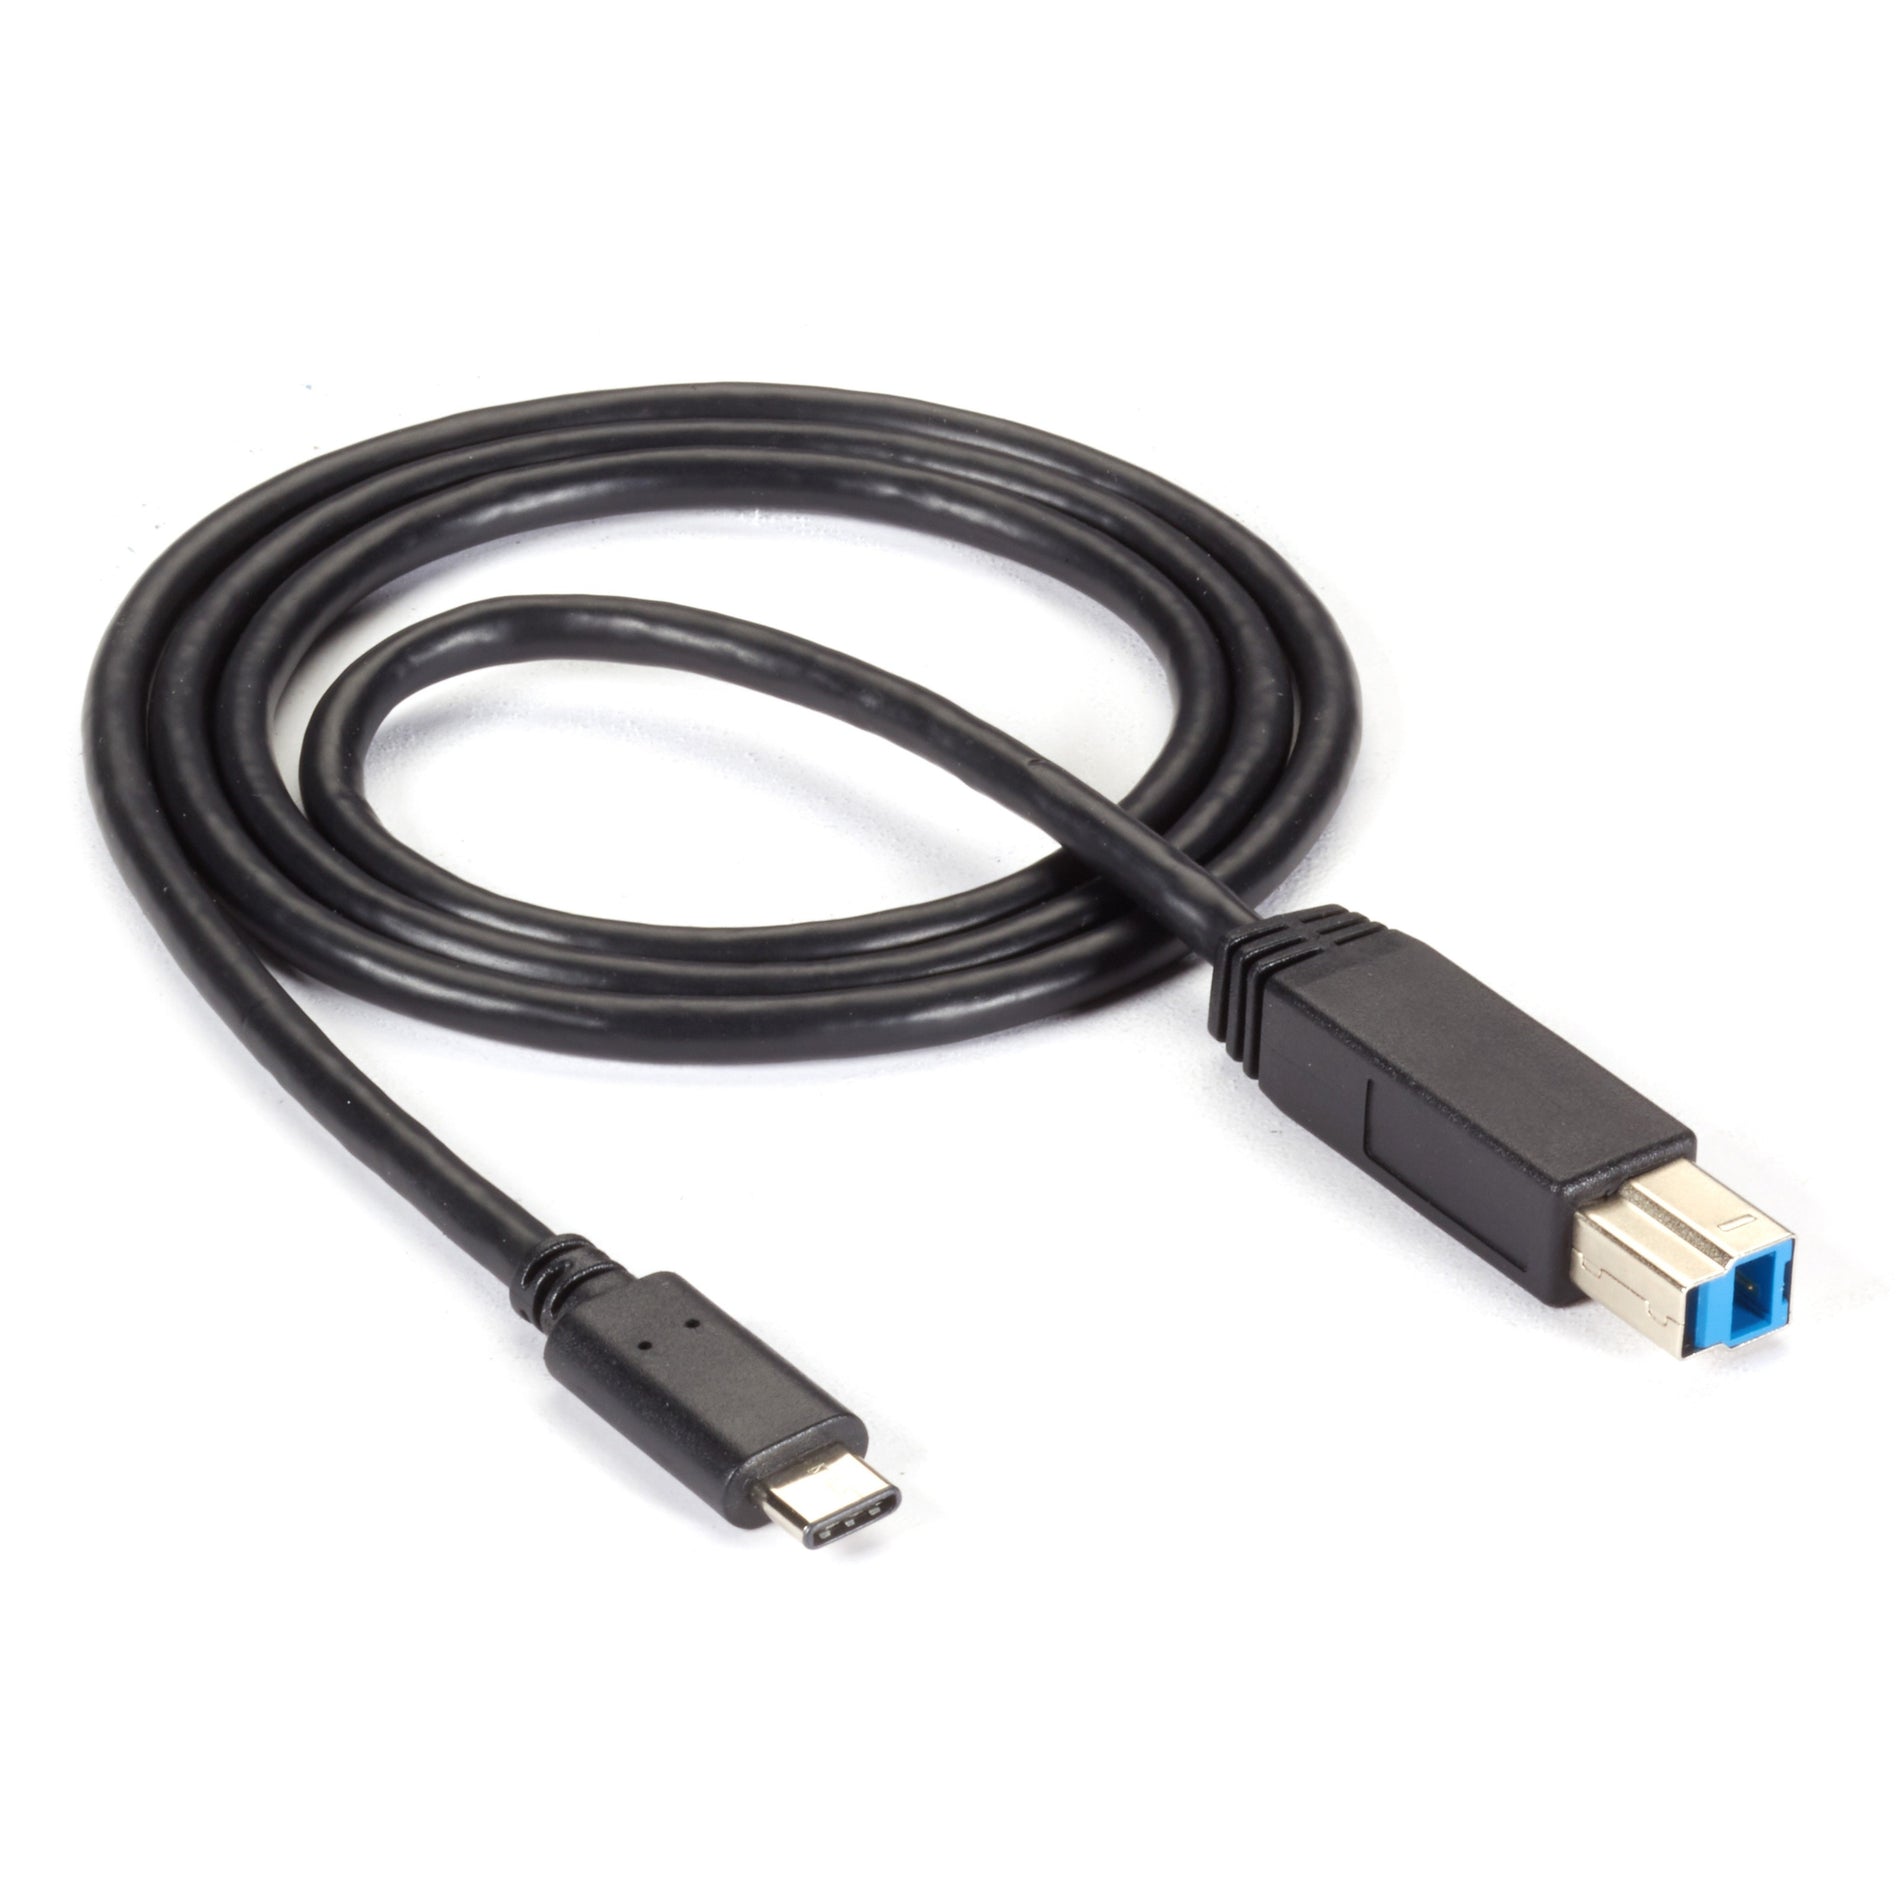 Black Box USB3CB-1M USB 3.1 Cable - Type C Male to USB 3.0 Type B Male, 3.28 ft, Charging, Reversible